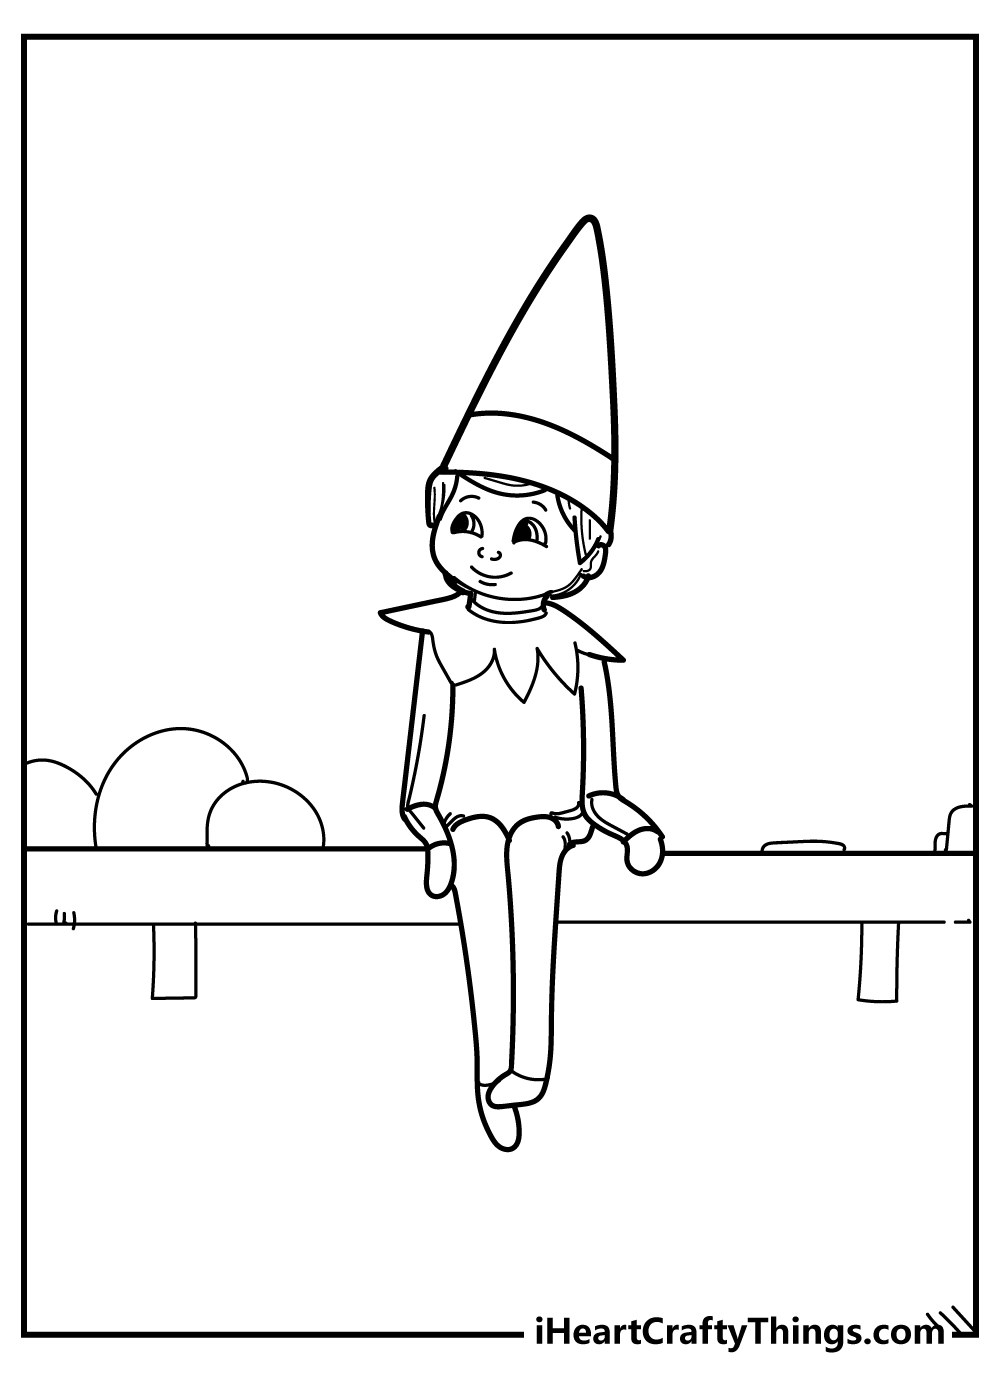 Elf on the shelf coloring pages free printable